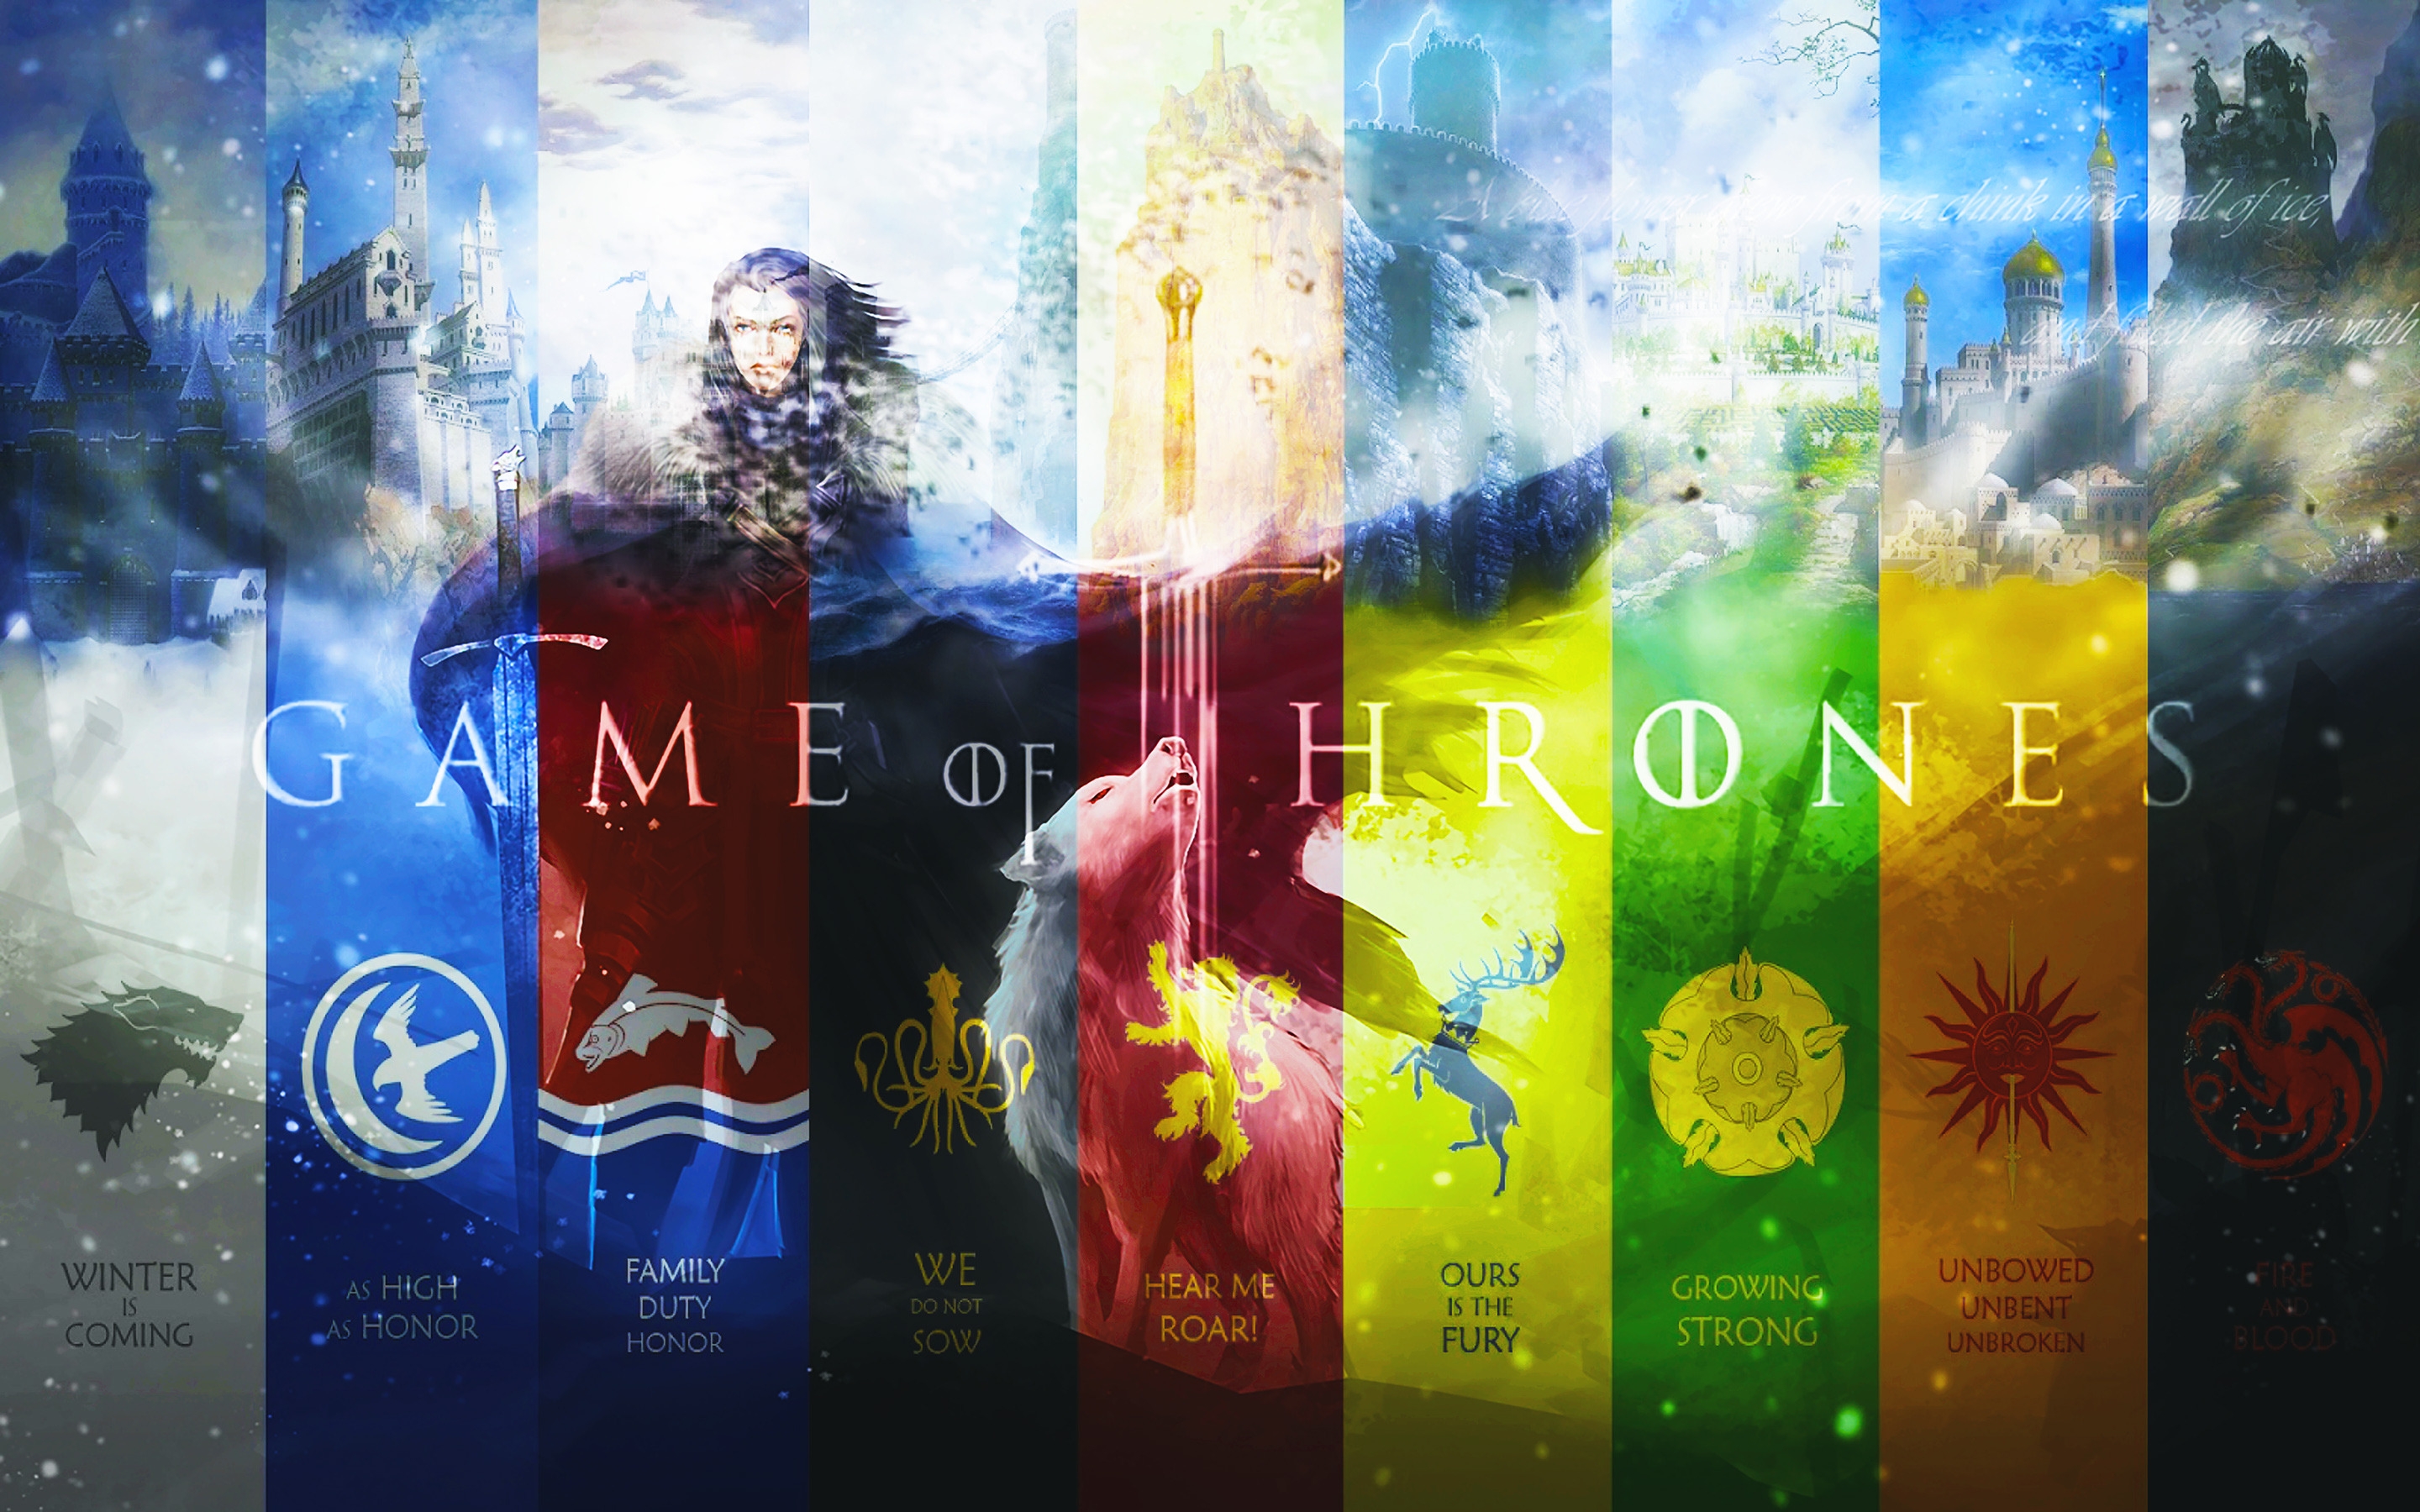 Game of Thrones Fan Art for 2880 x 1800 Retina Display resolution